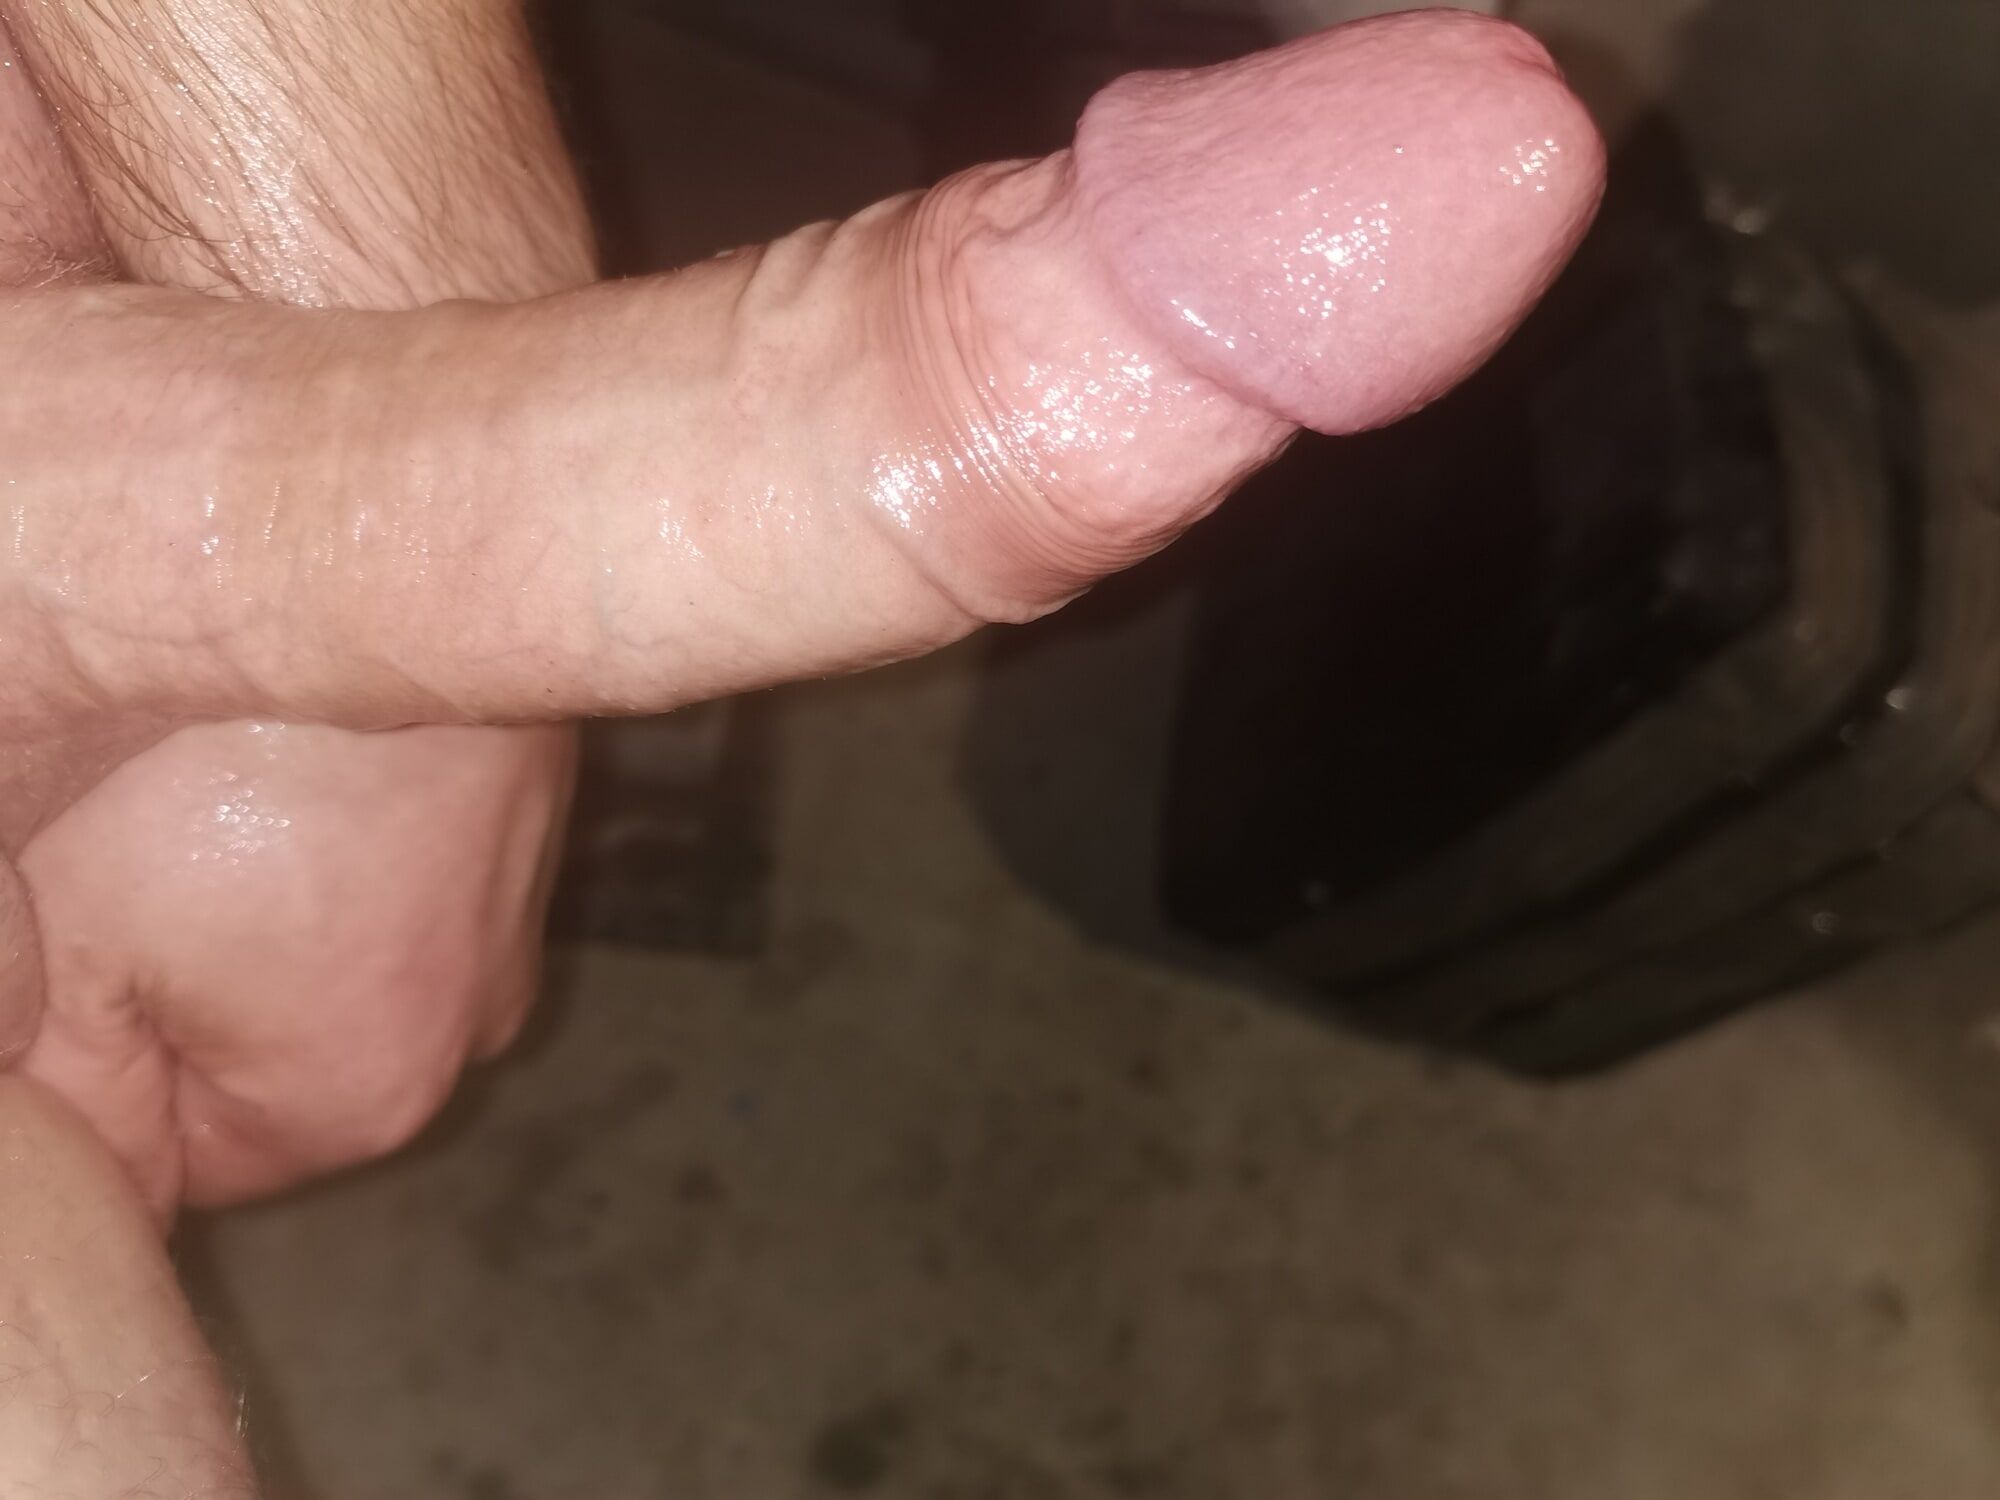 A sweet dick to lick #2